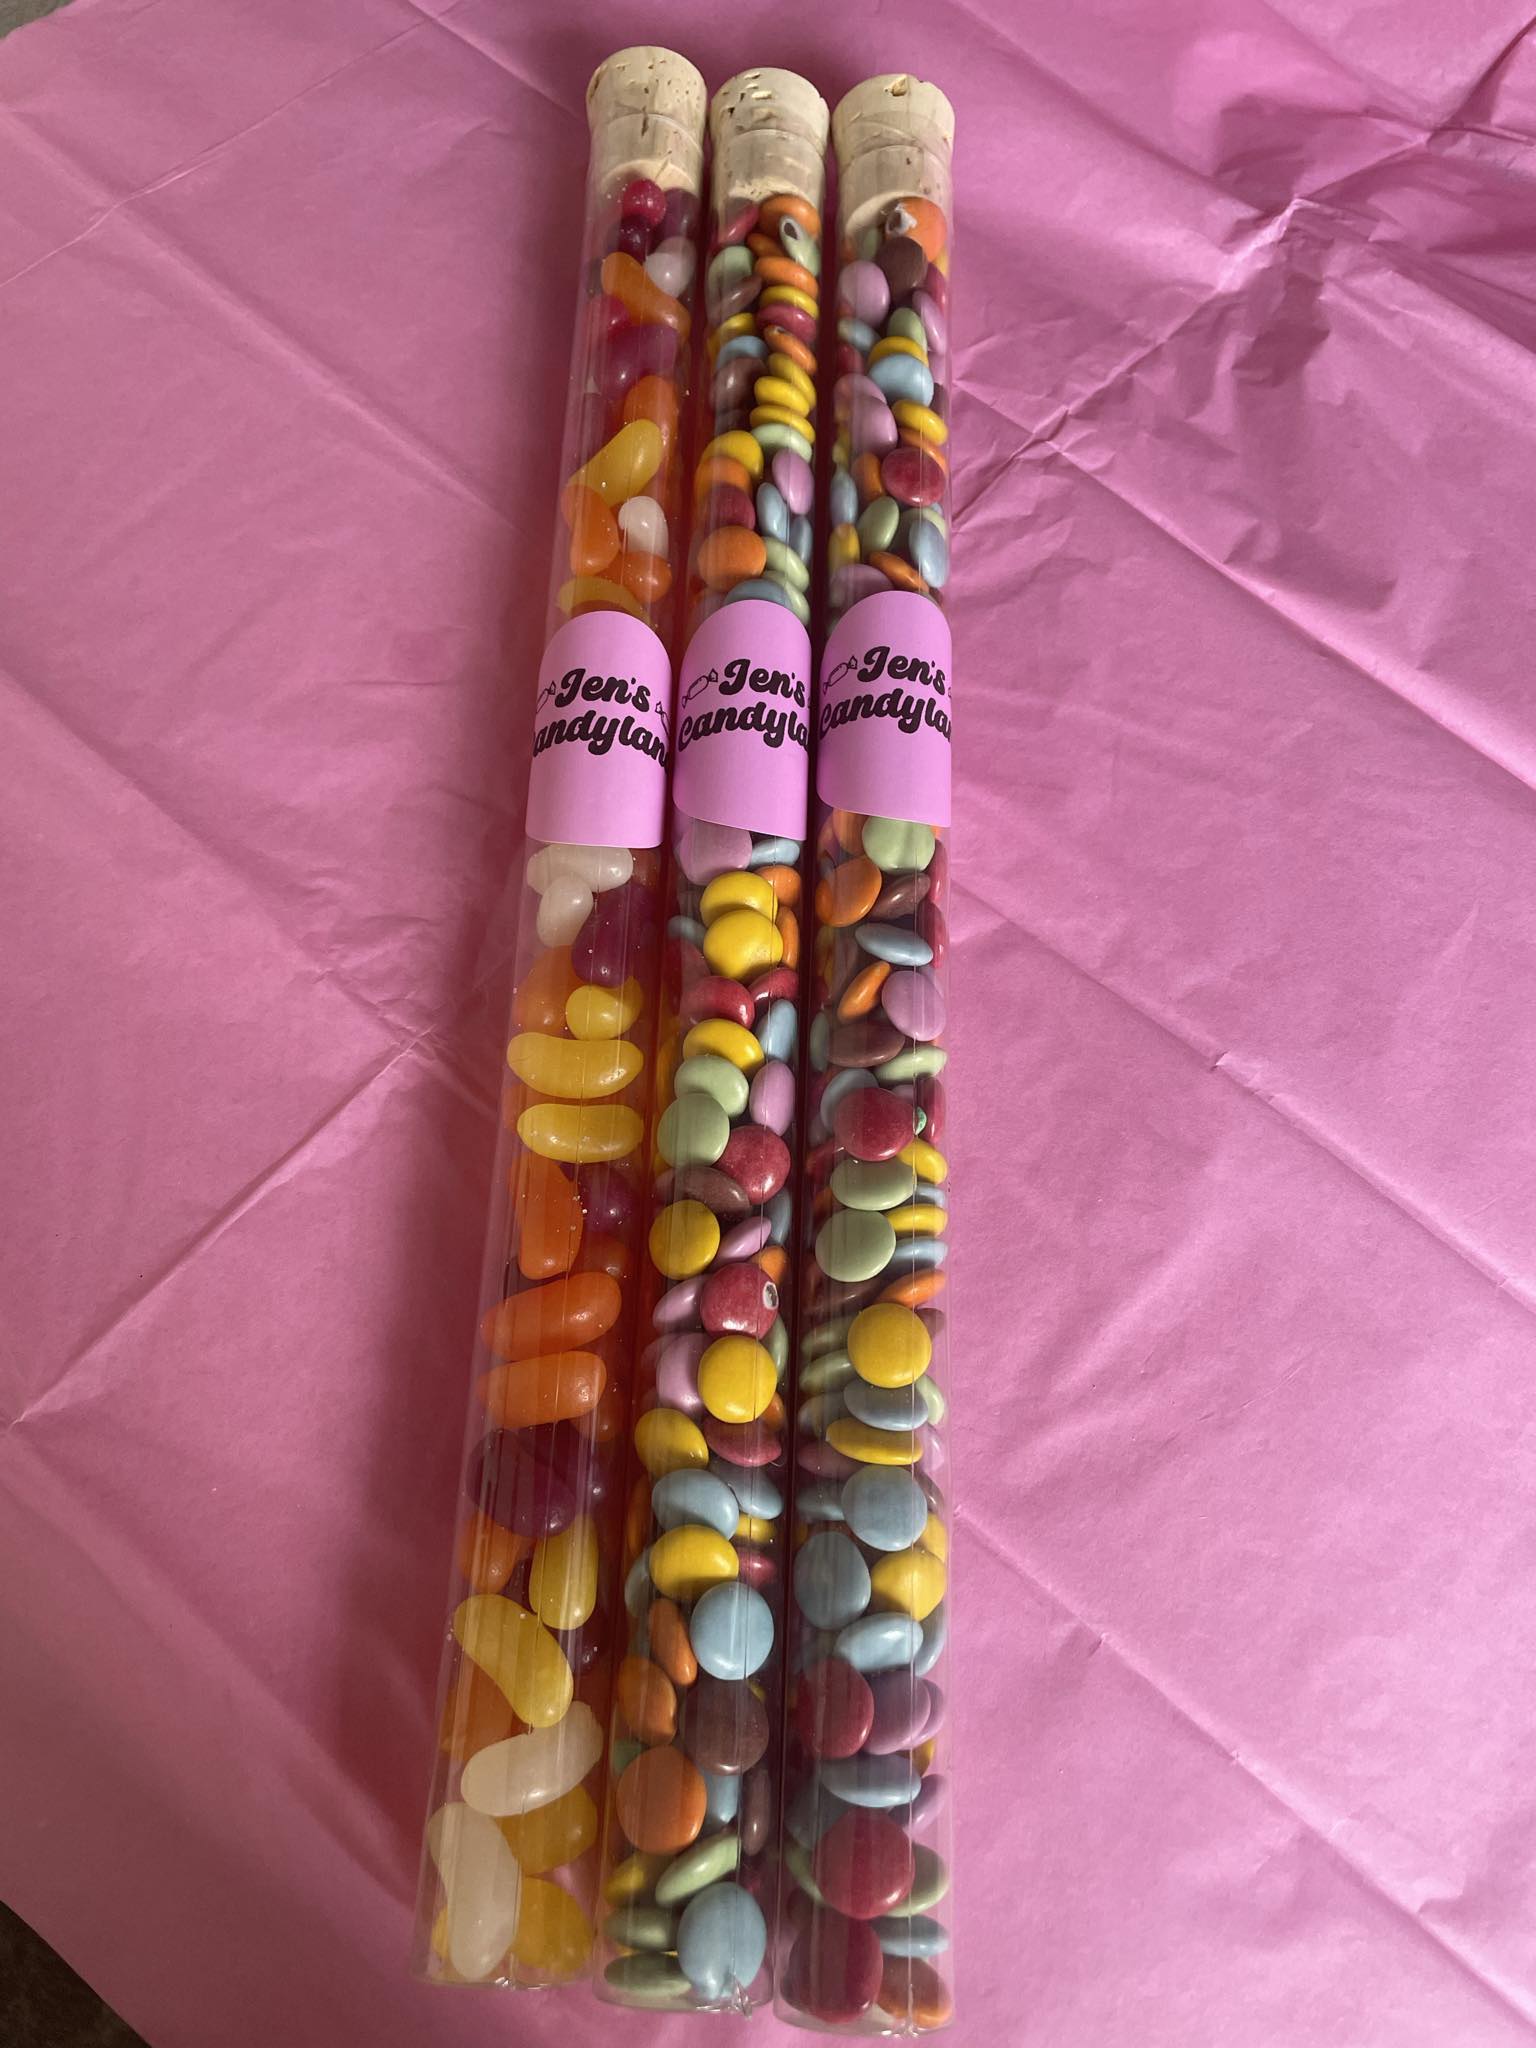 Large Tubes Filled with Jelly Beans or Smarties